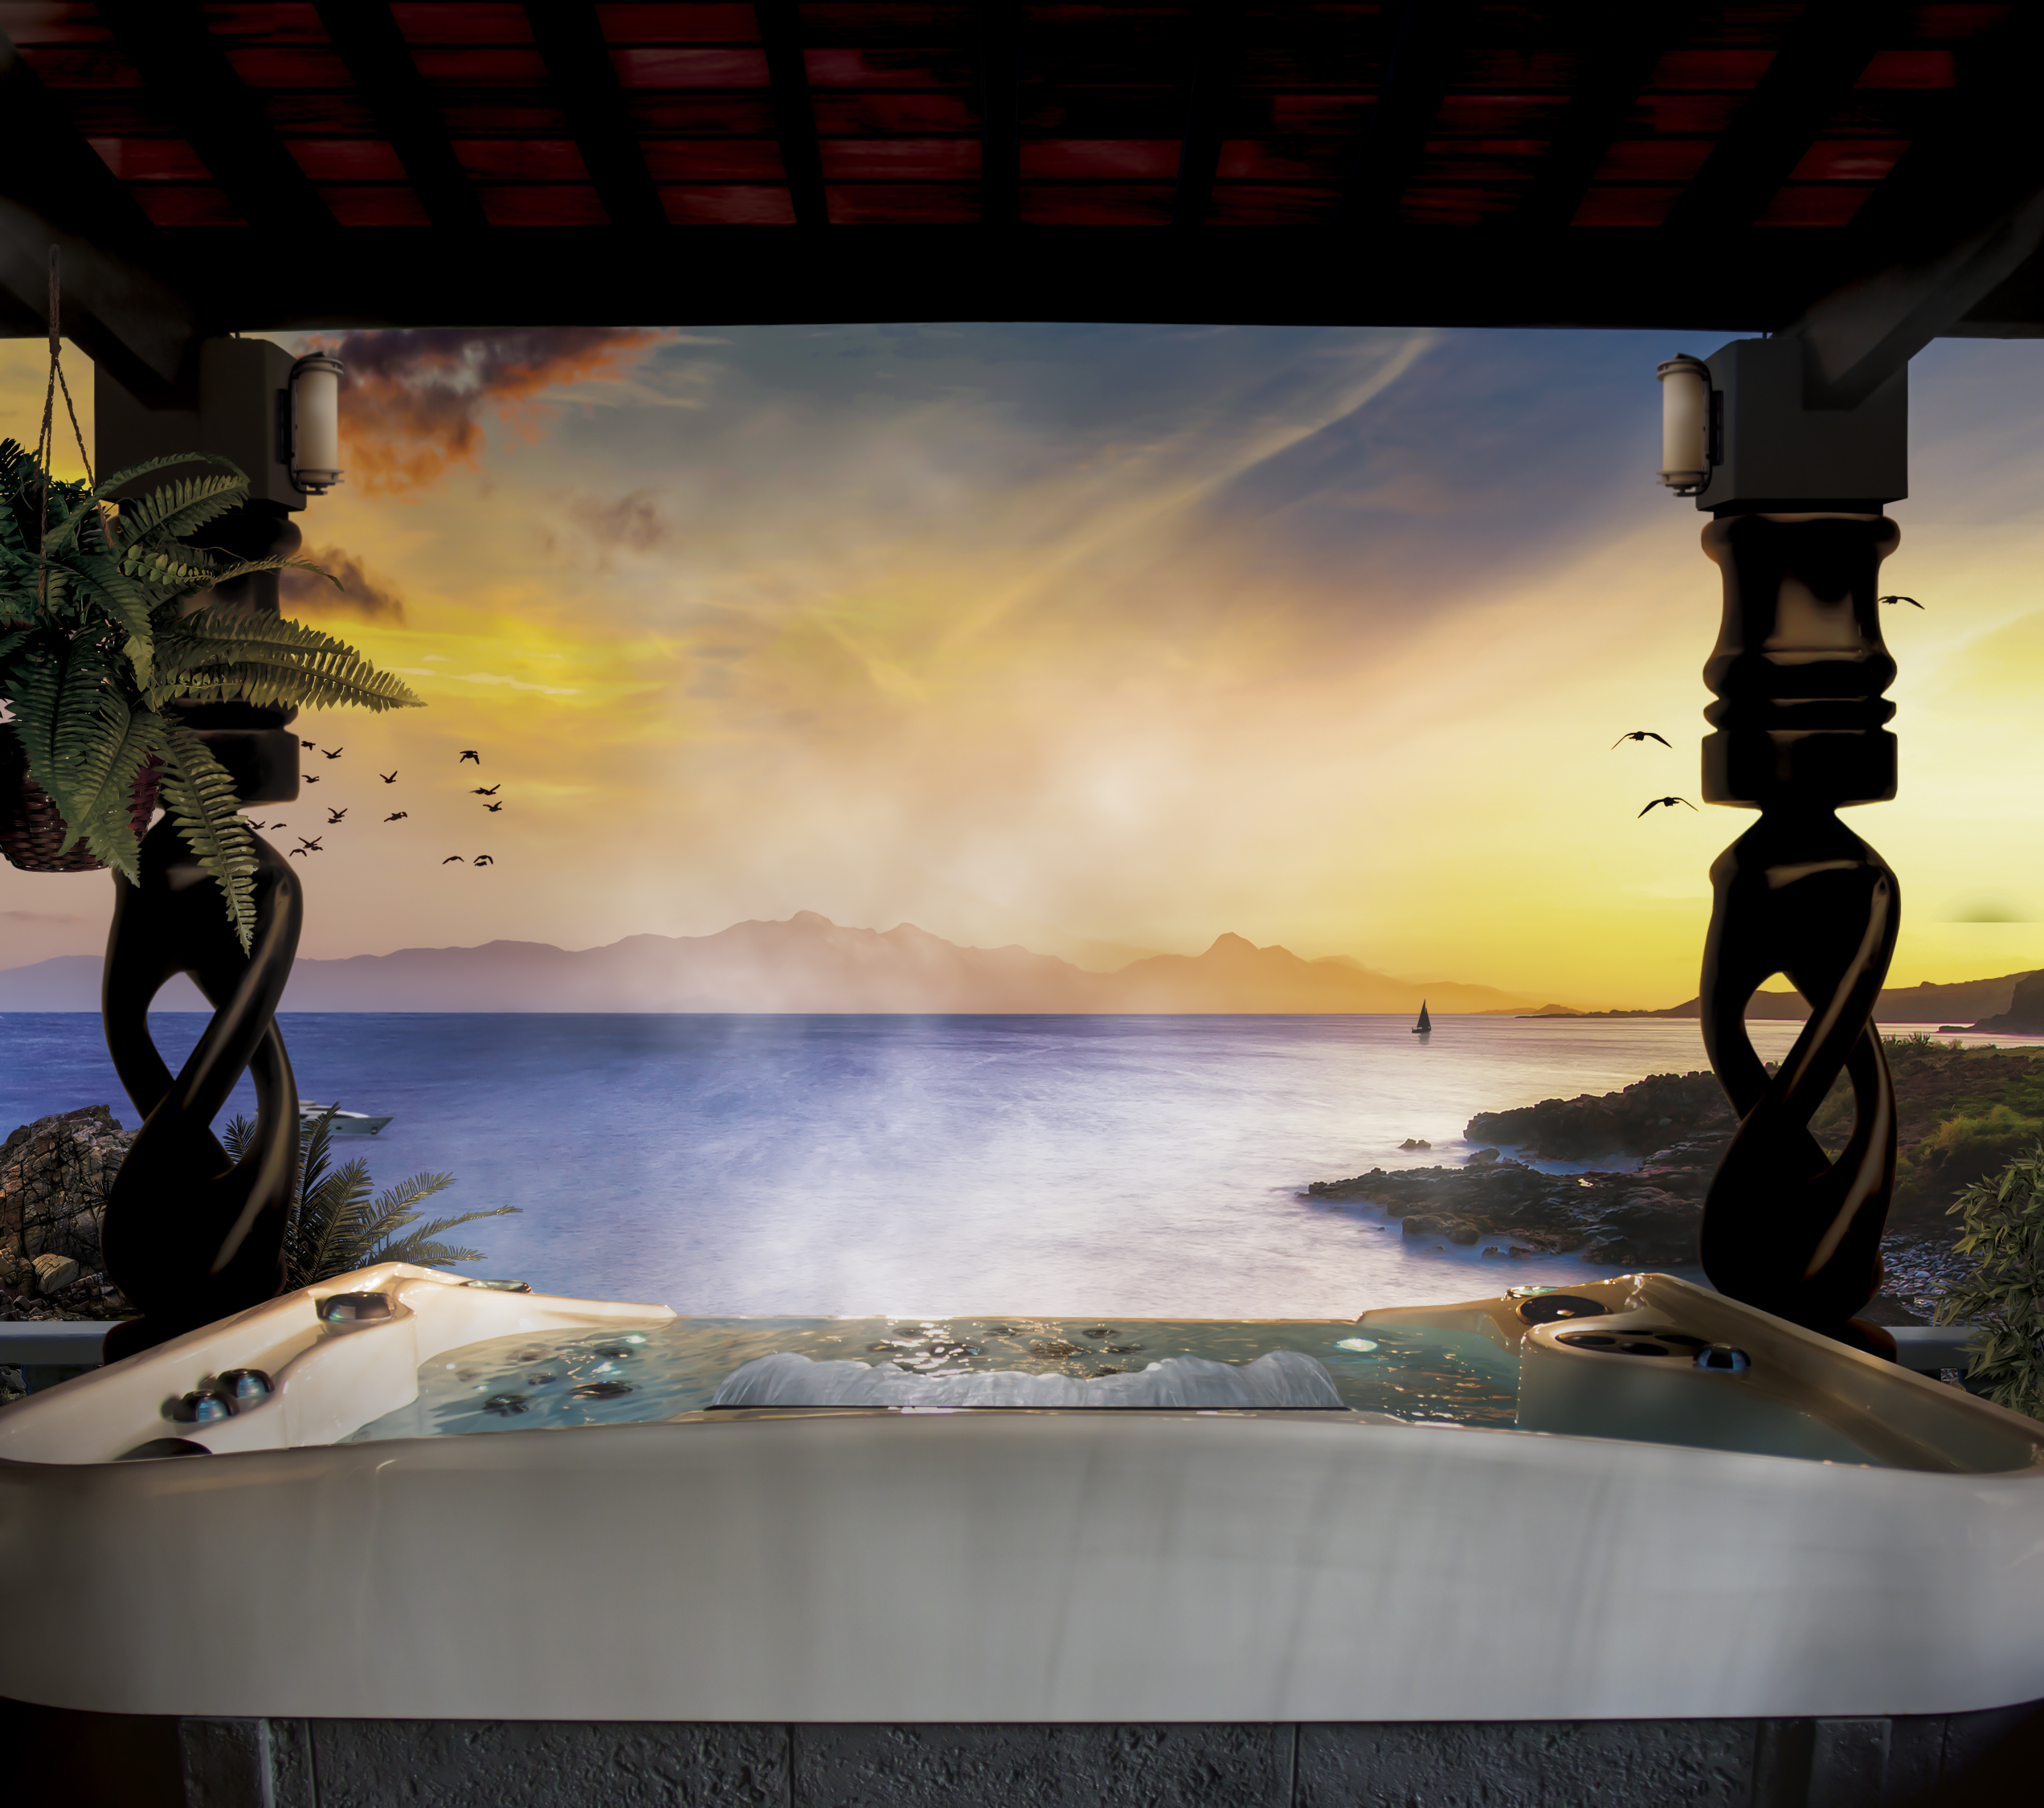 Coast Spas Infinity Edge Spa brochure photo with view of ocean and mountains in background during sunset